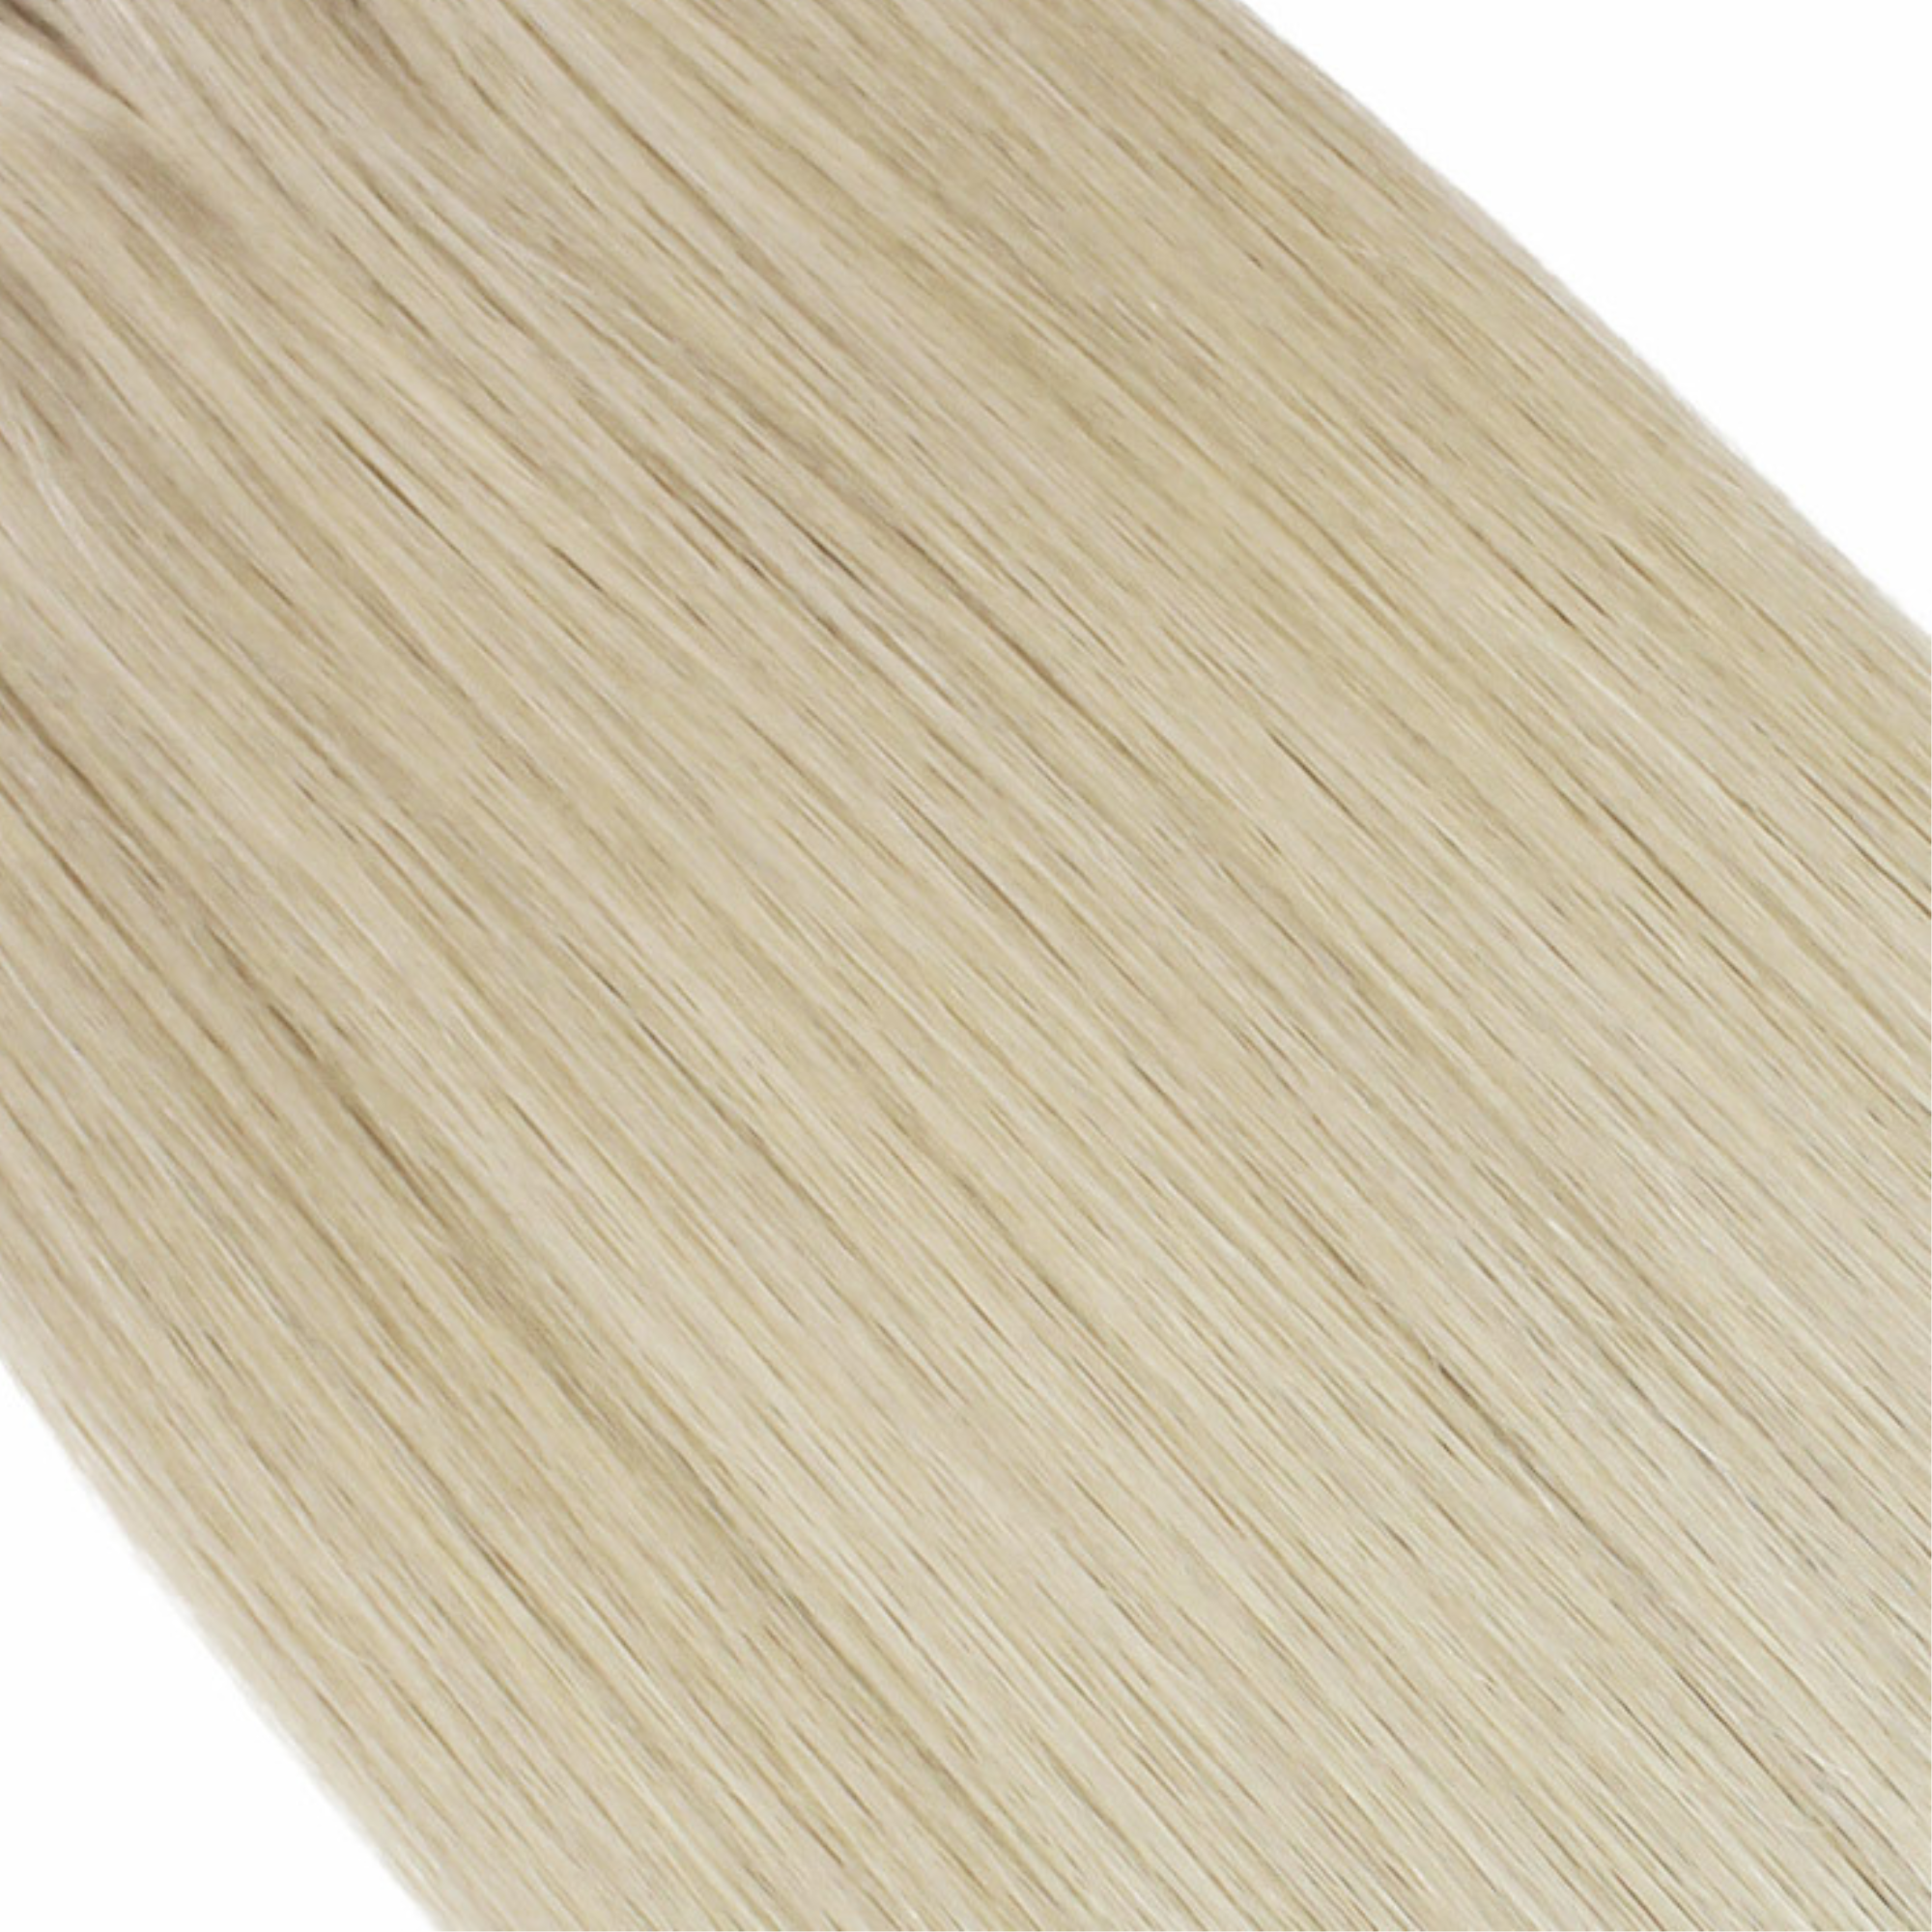 "hair rehab london 14" weft hair extensions shade swatch titled ice blonde"